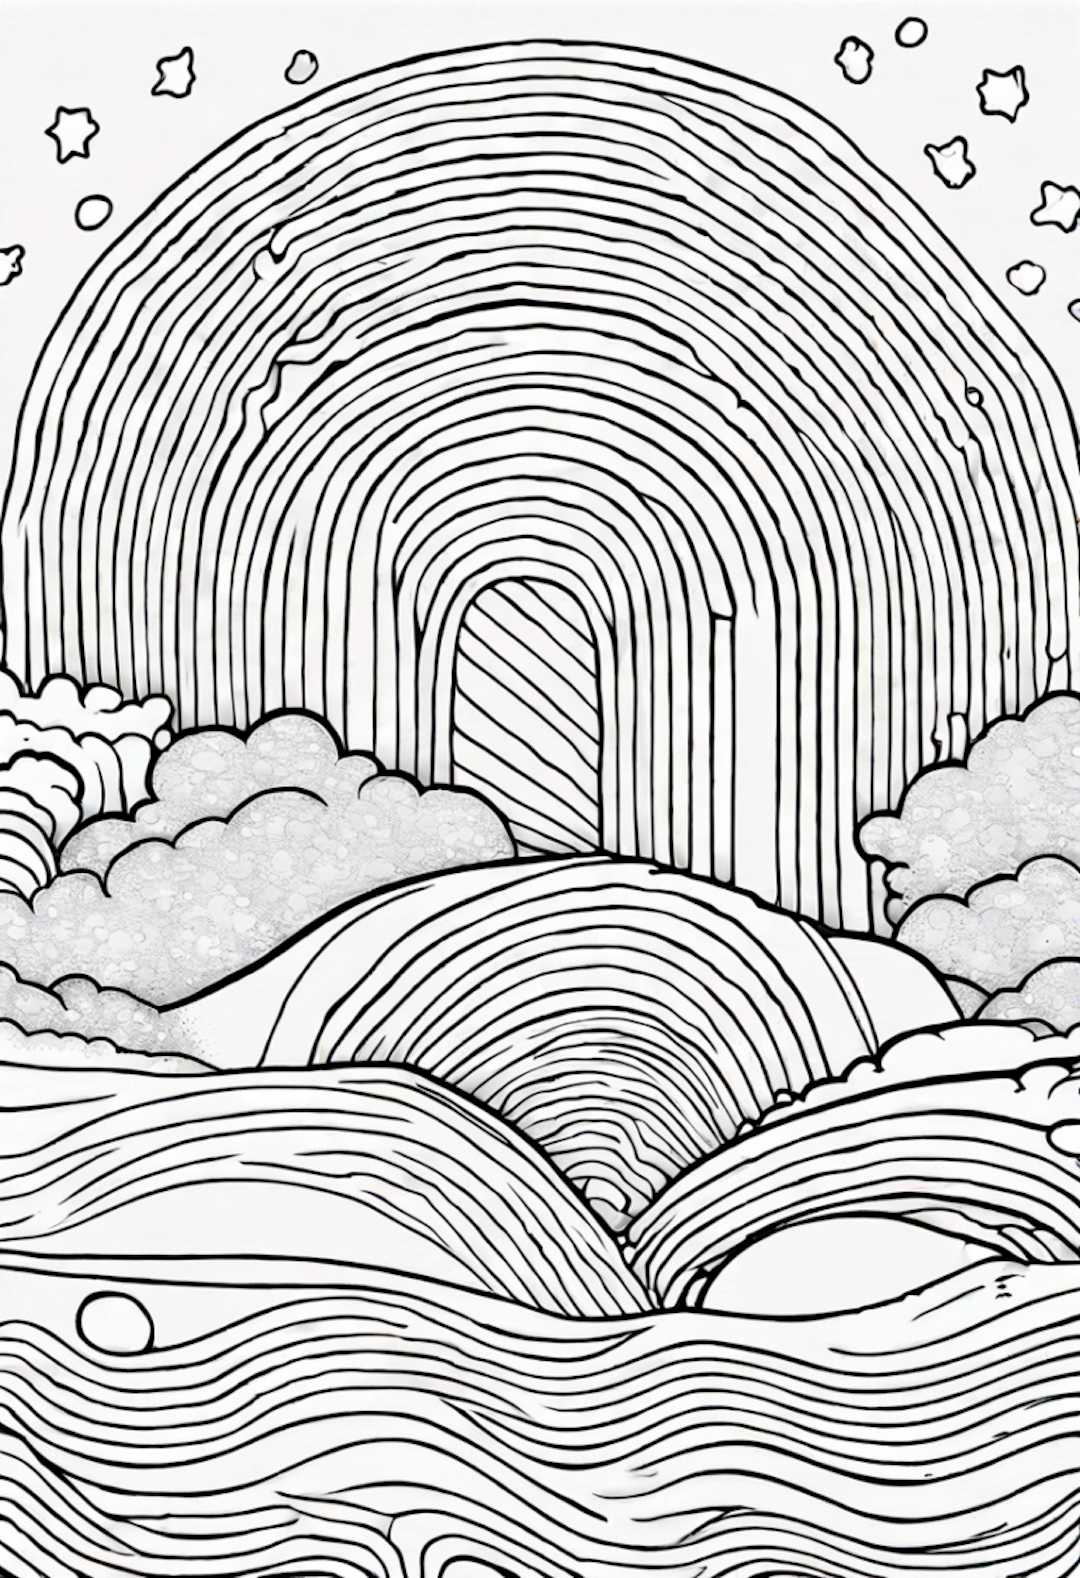 “Rainbow Archway and Clouds Coloring Adventure” coloring pages